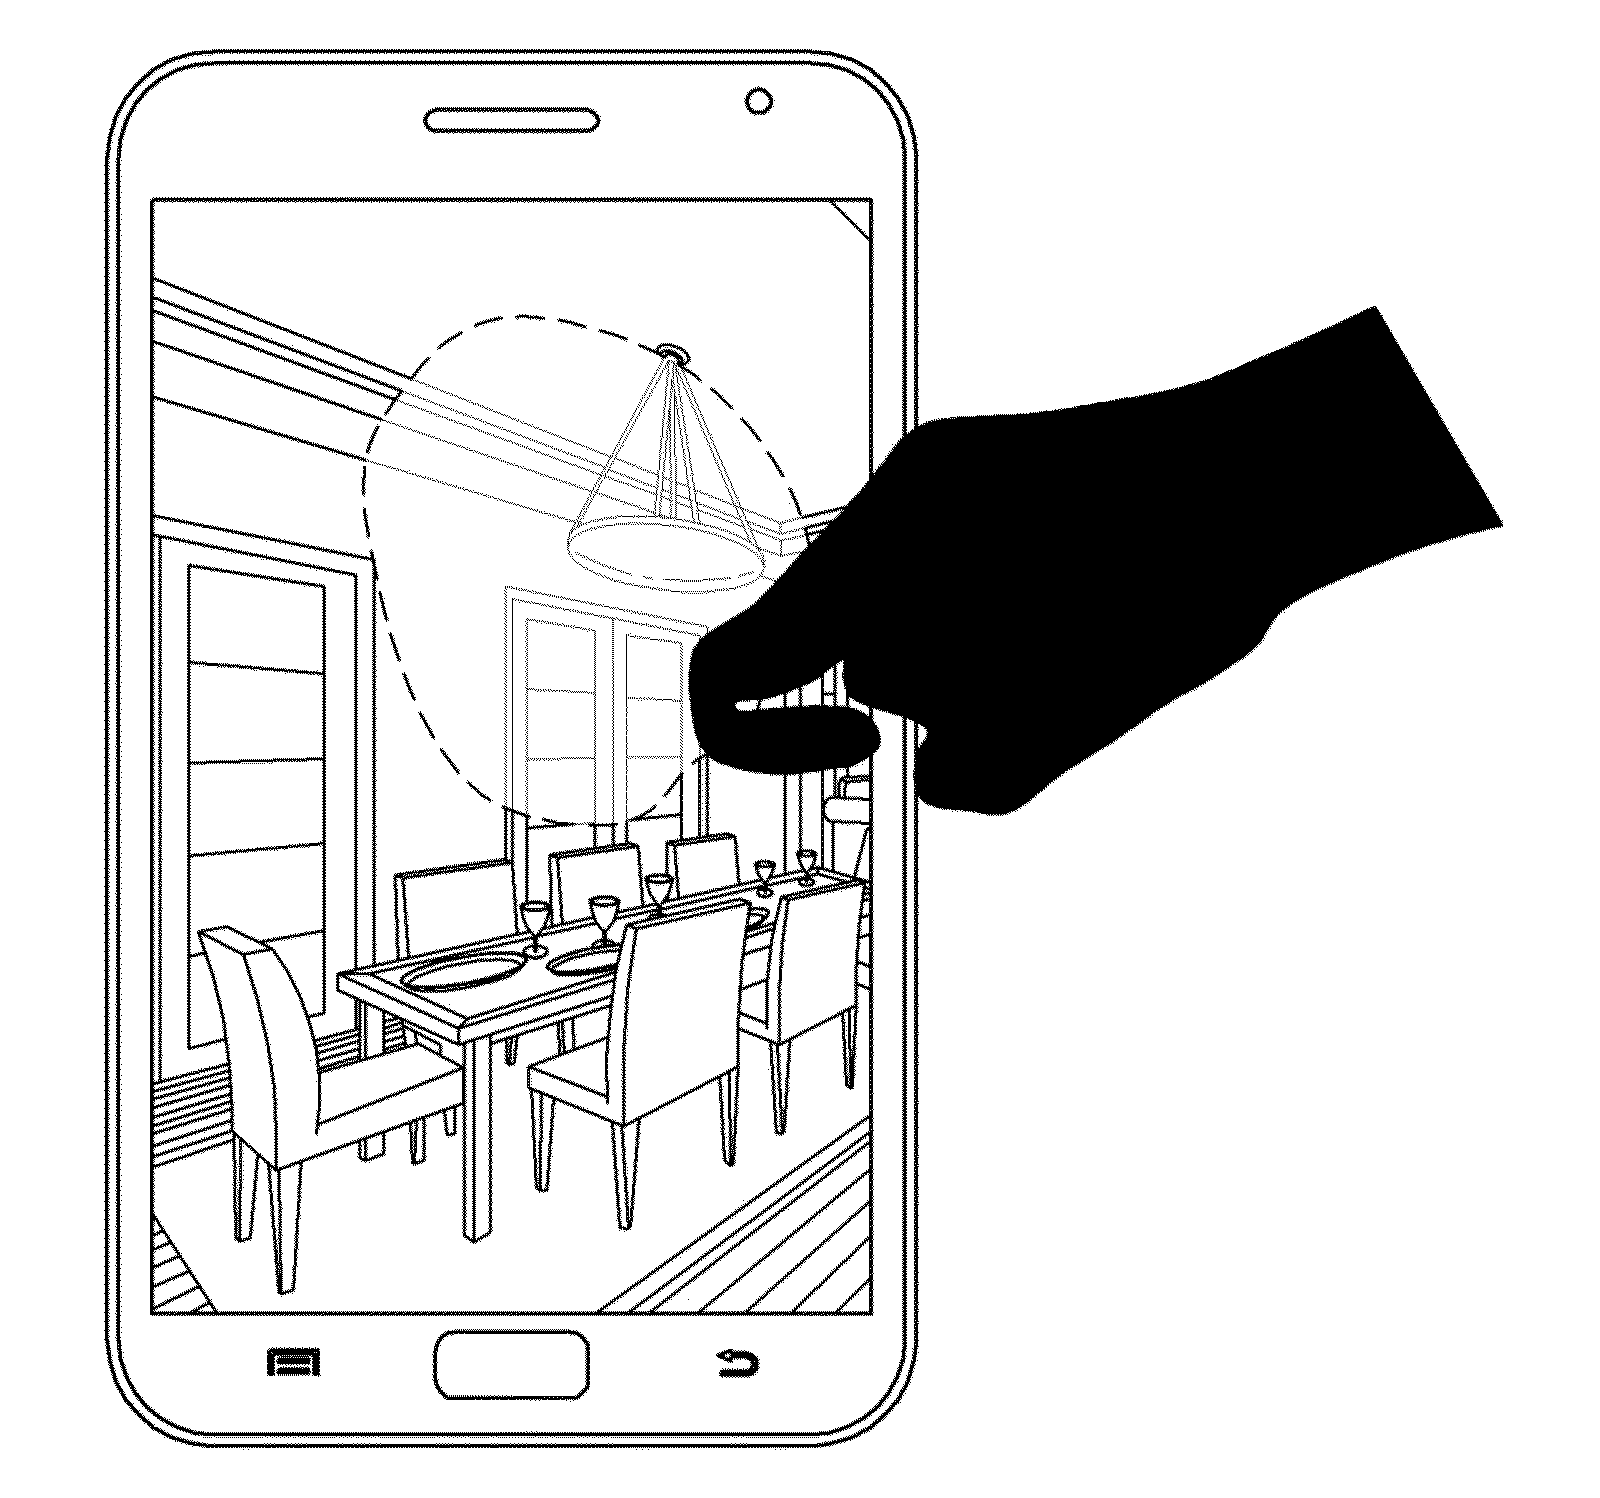 Method and system for activating different interactive functions using different types of finger contacts